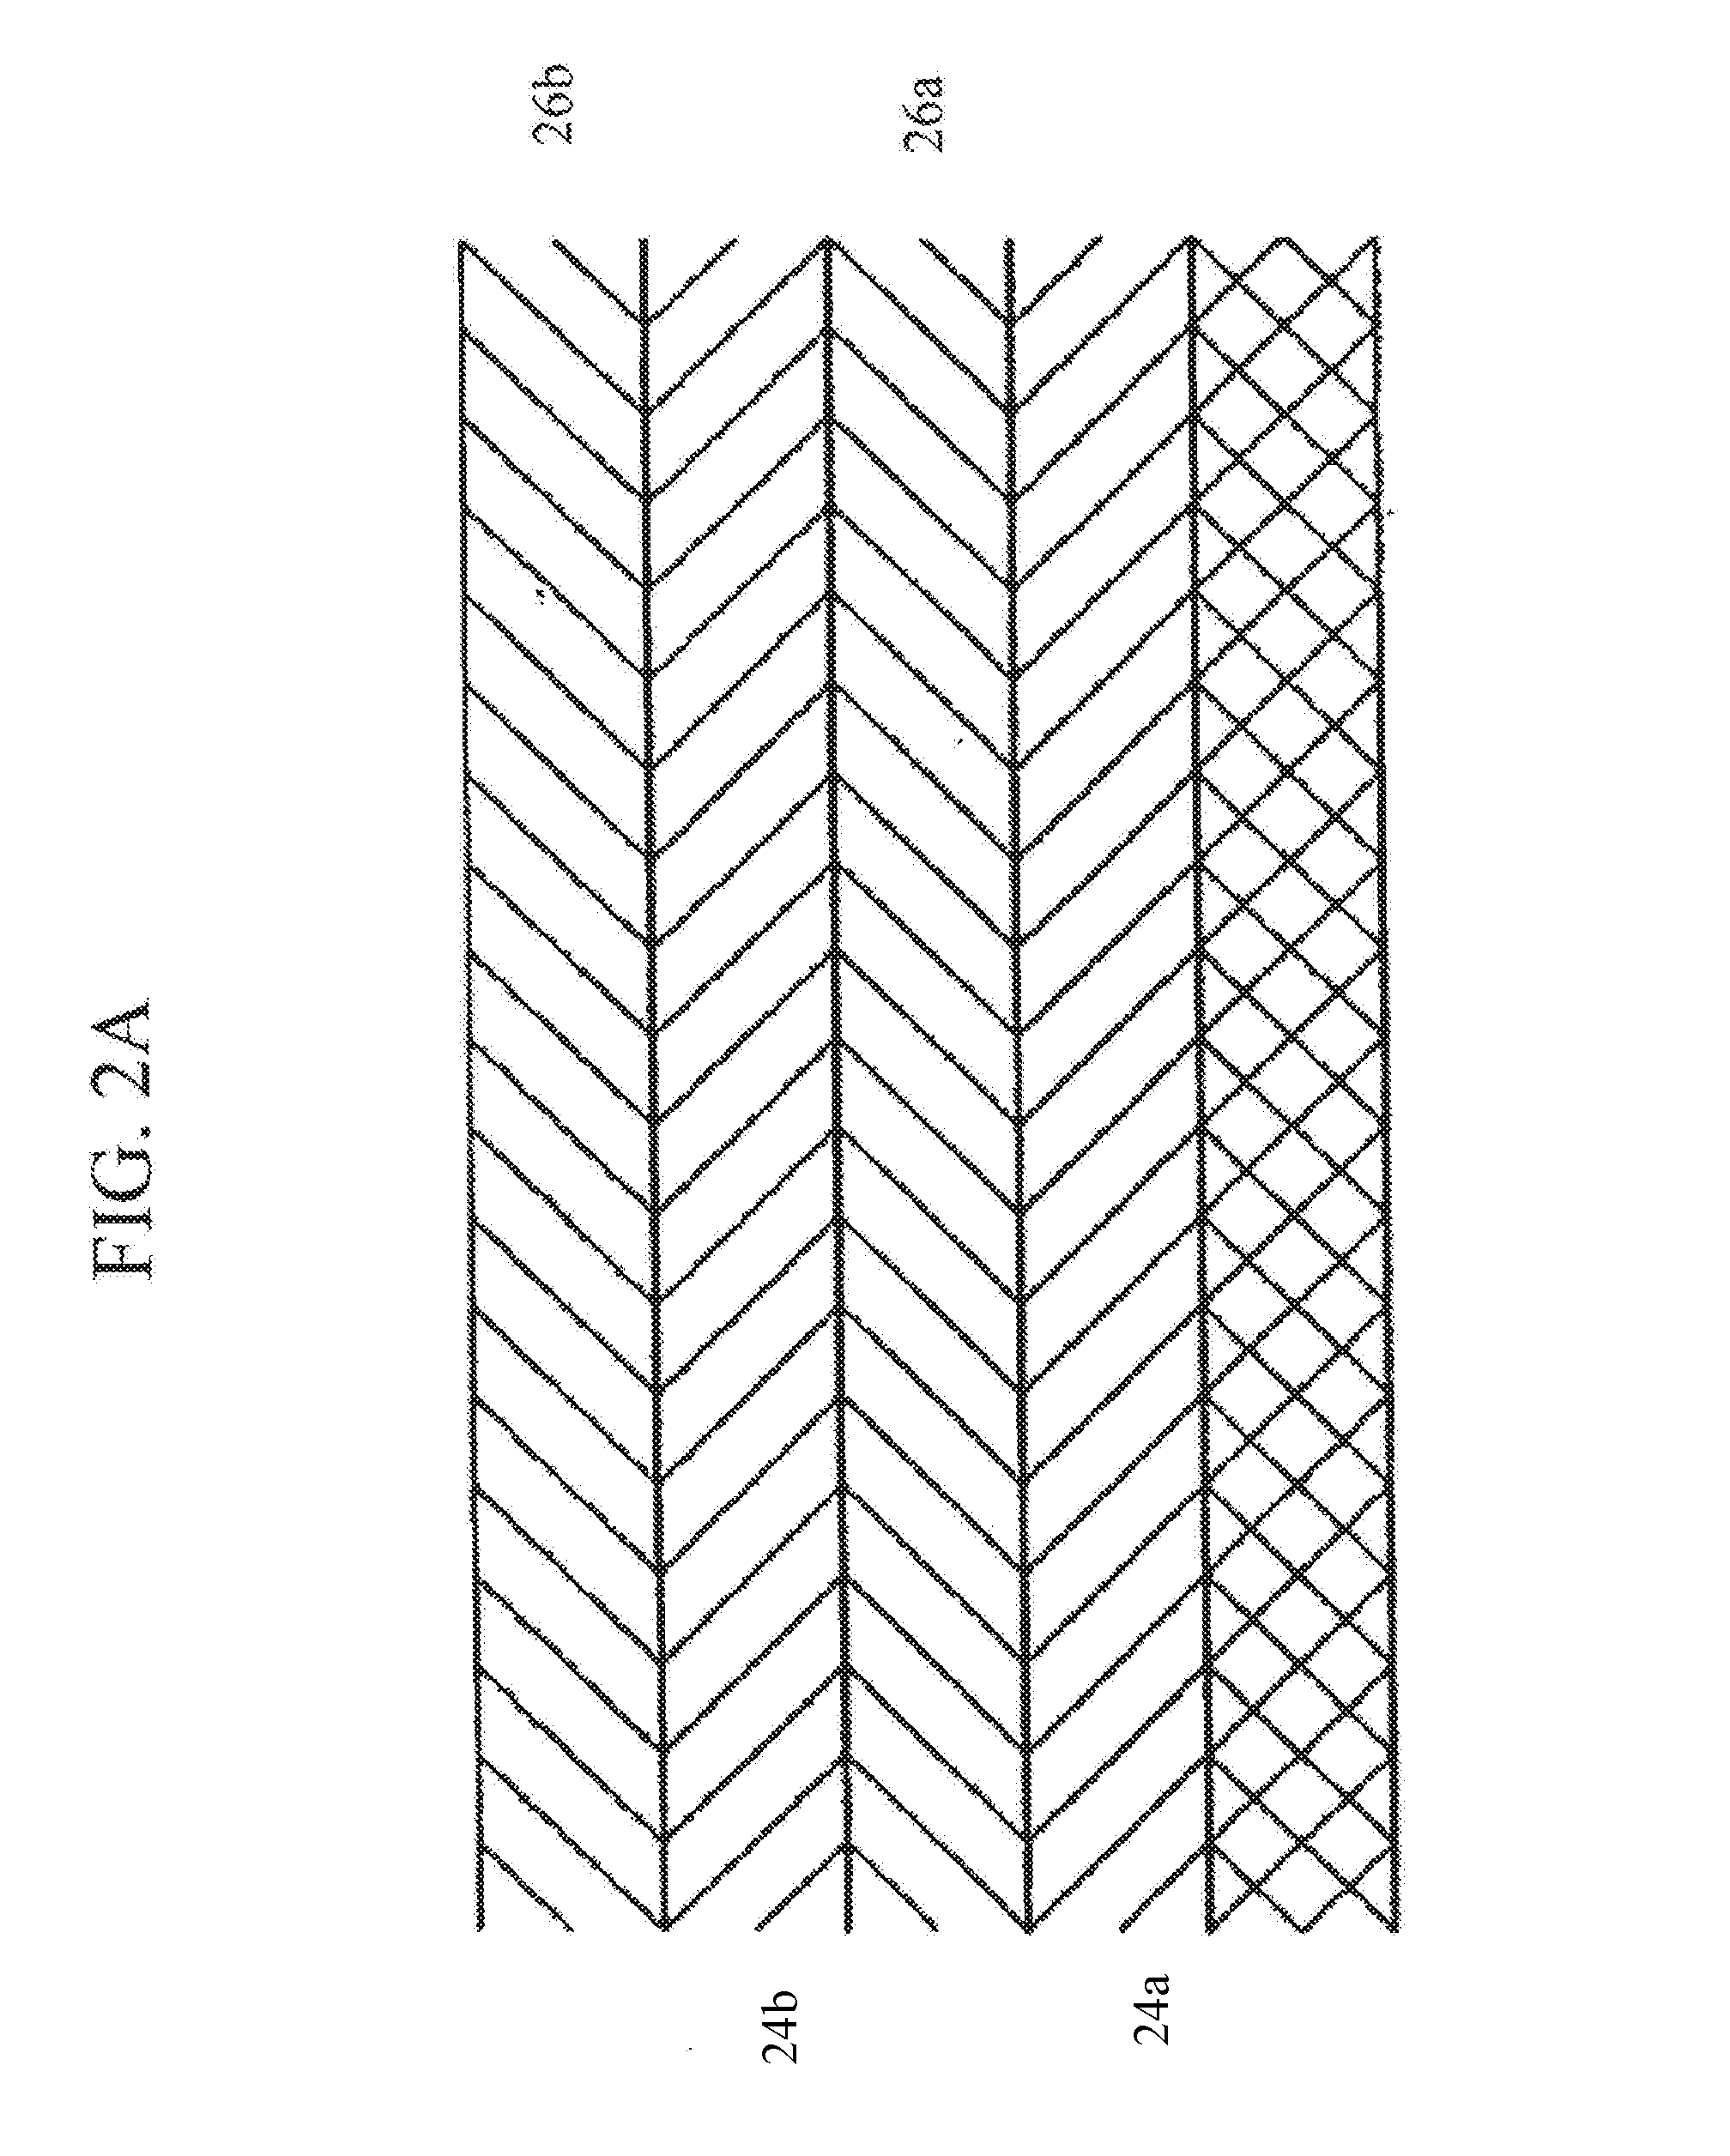 Erosion and corrosion resistant protective coating for turbomachinery methods of making the same and applications thereof